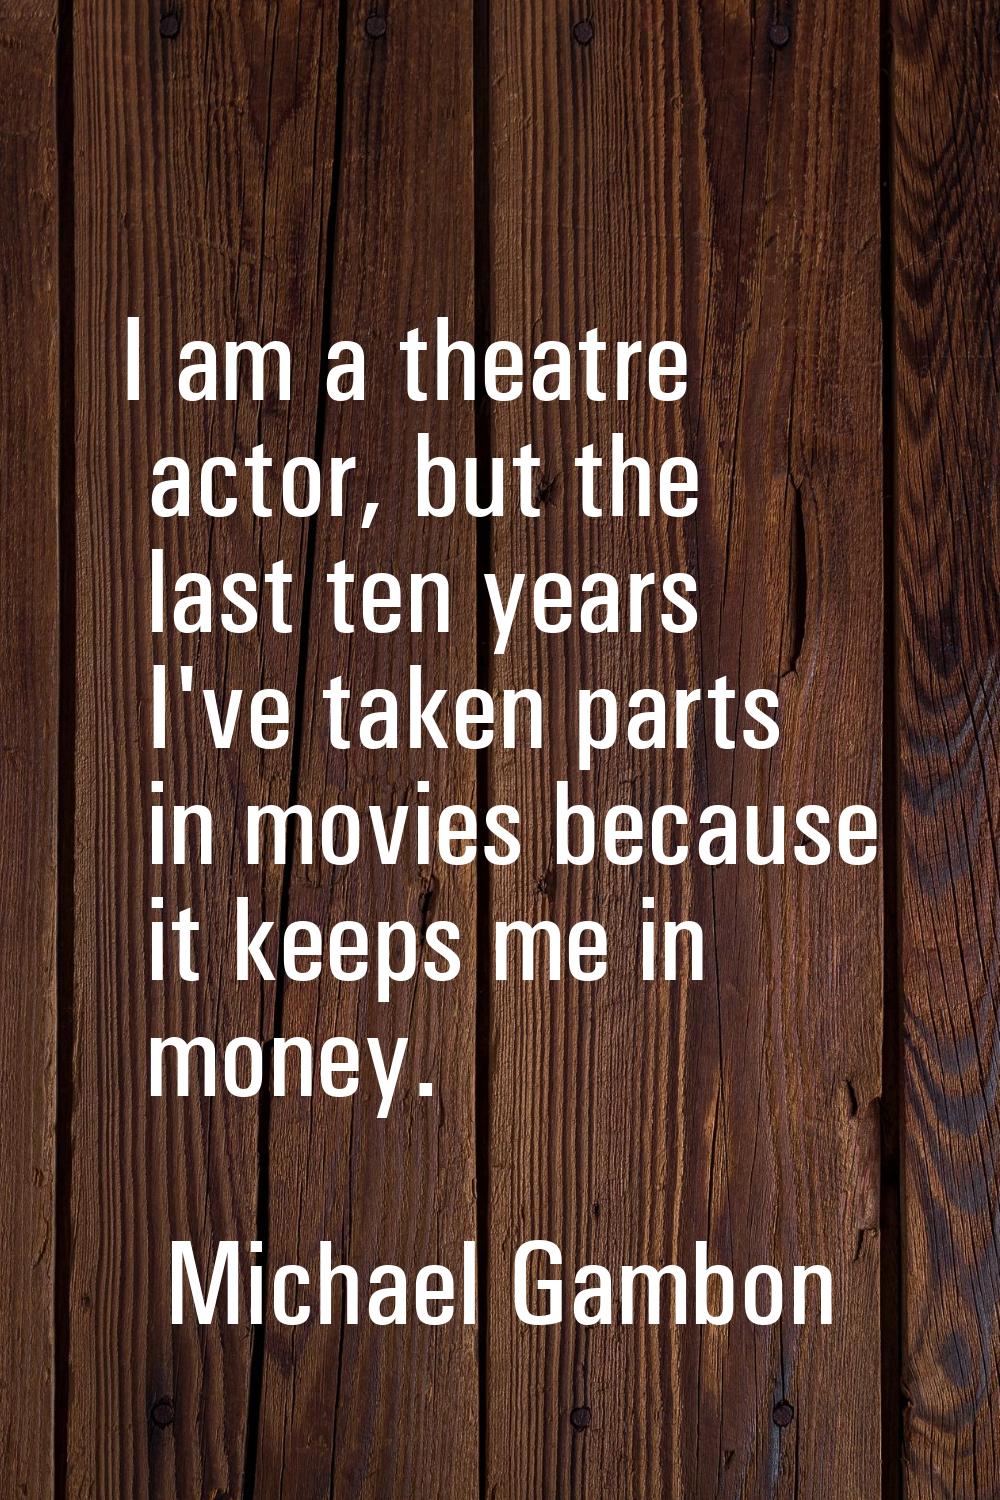 I am a theatre actor, but the last ten years I've taken parts in movies because it keeps me in mone